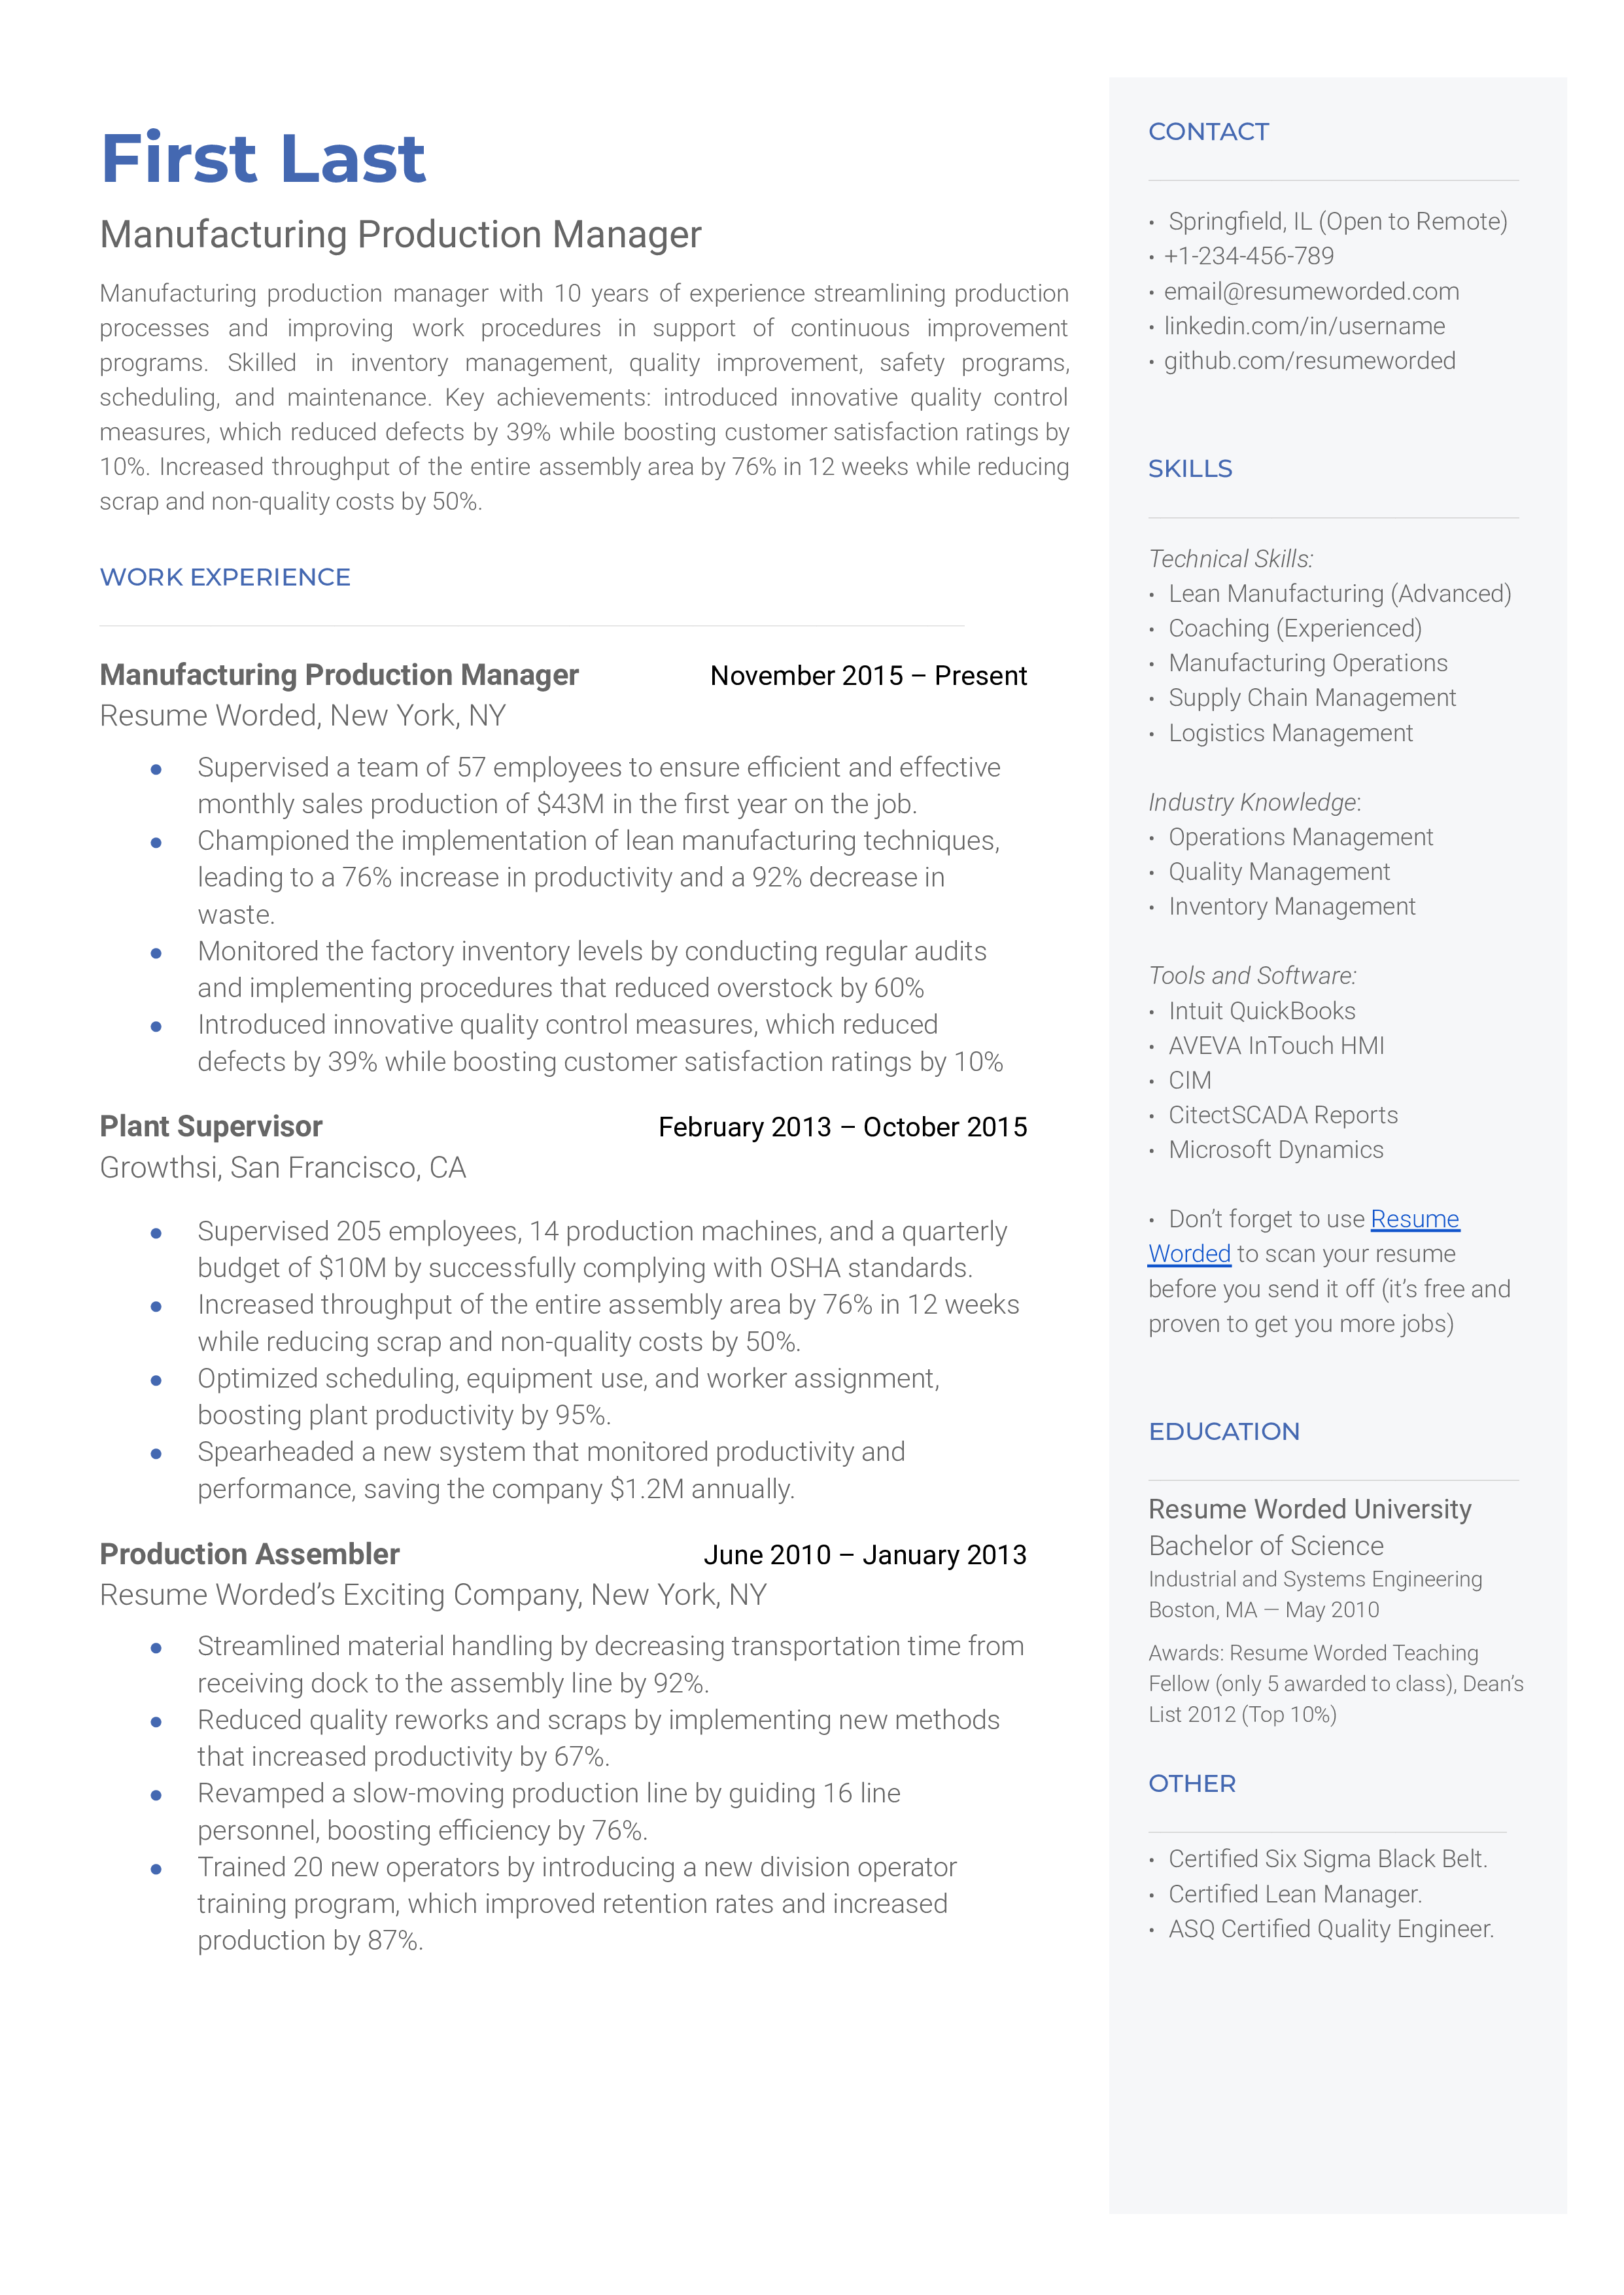 A well-structured CV of a Manufacturing Production Manager showcasing their technical and leadership skills.